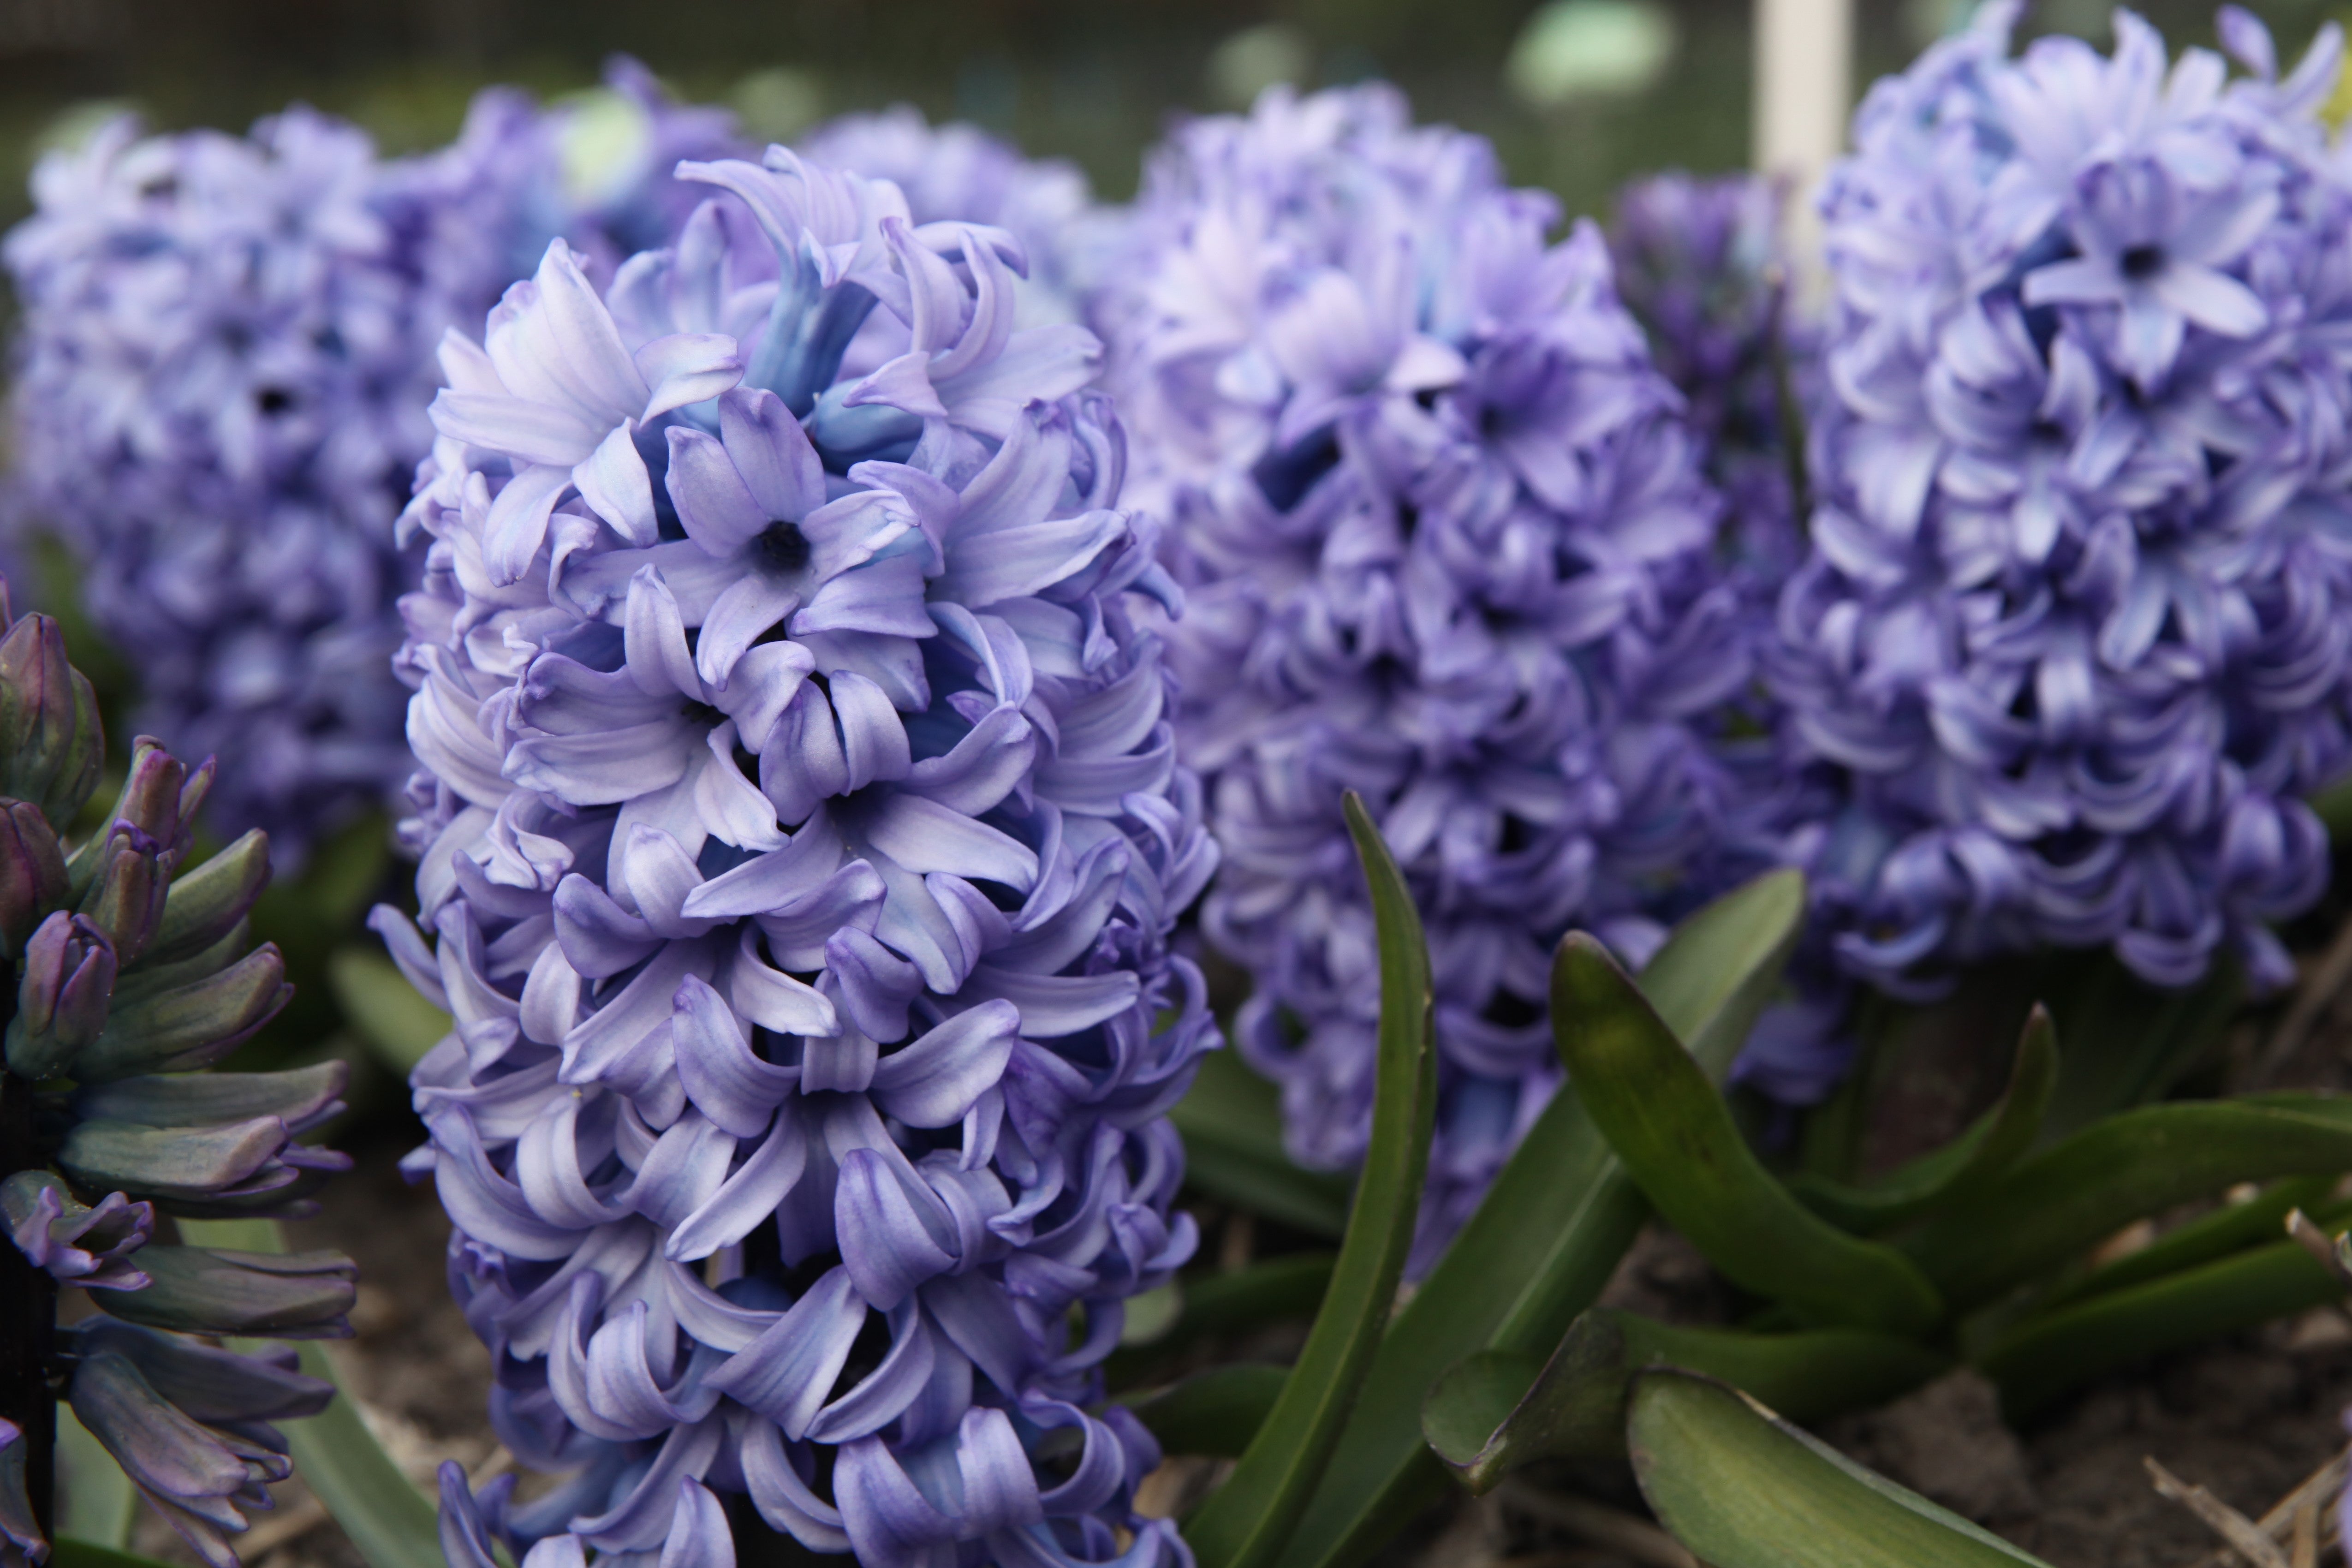 Gorgeous Chicago hyacinth: a burst of blue in the spring time.